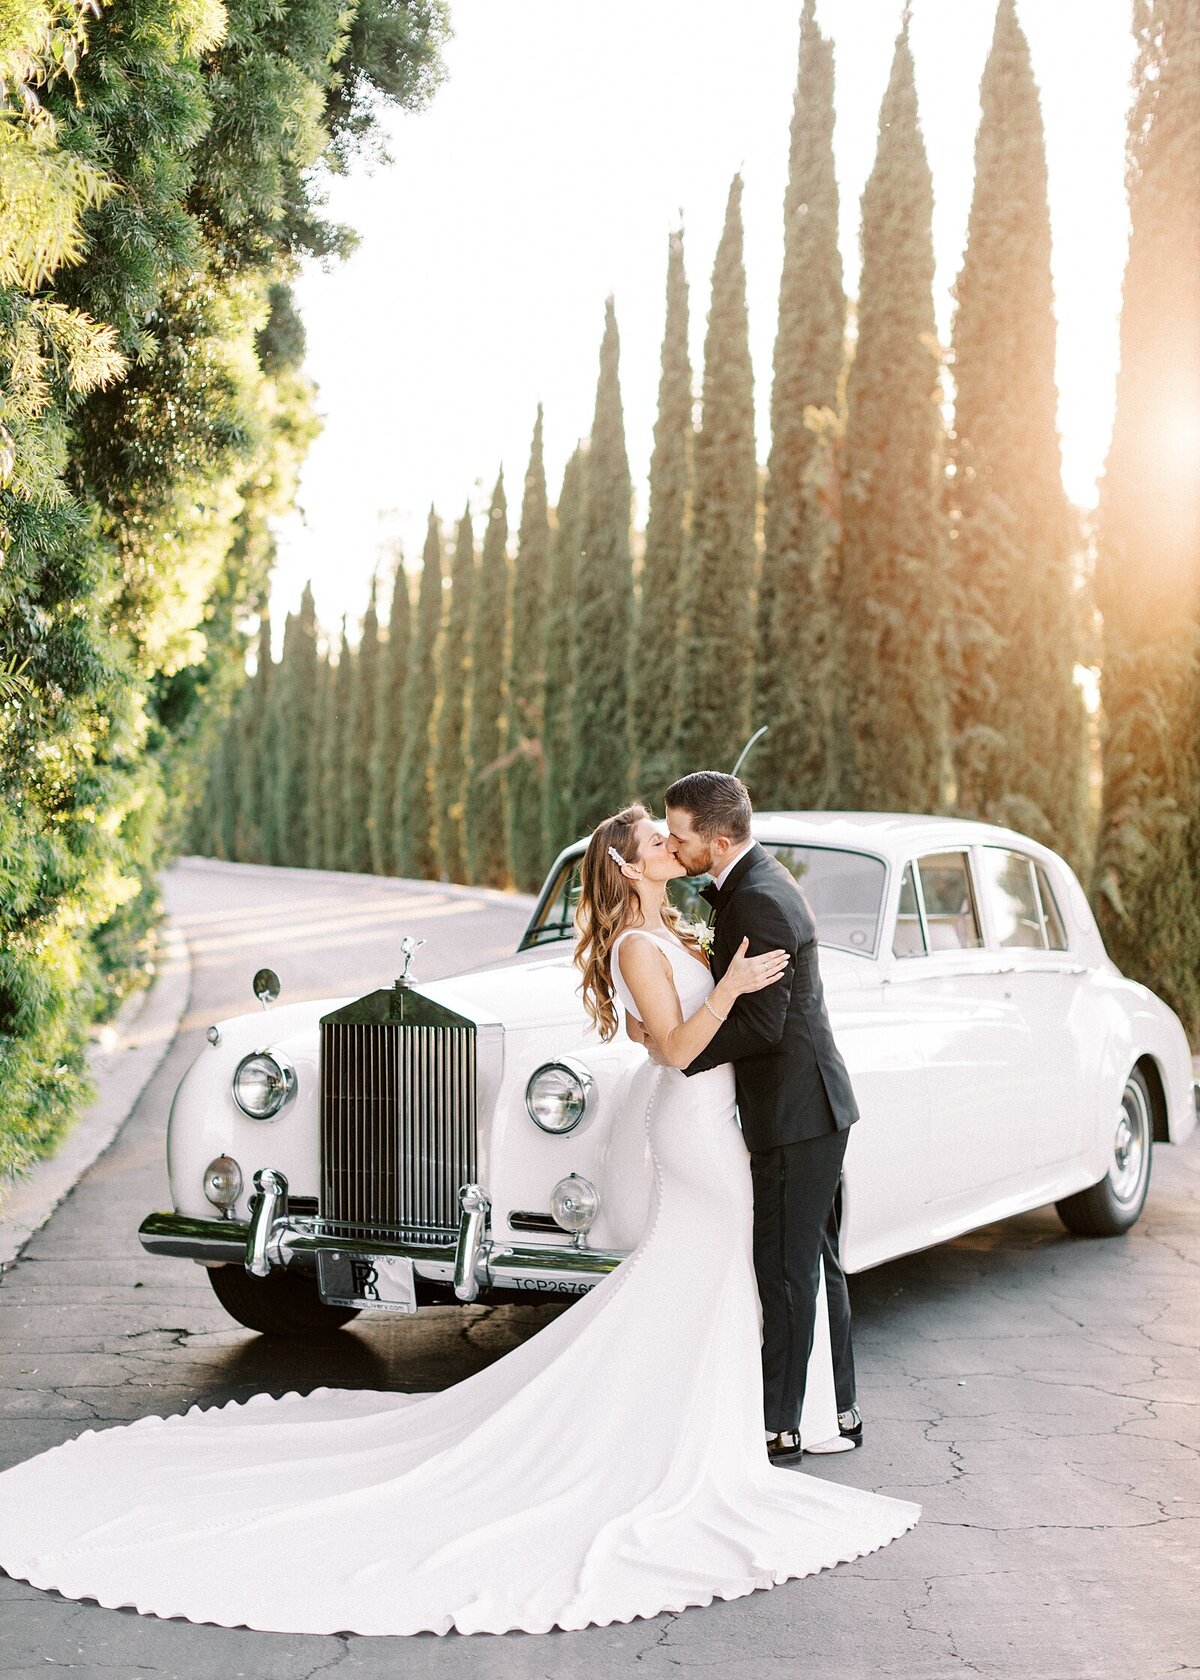 Blush black tie wedding at Twin Oaks Golf Course & Carmel Mountain Ranch Estate by Lisa Riley Photography based in San Diego, California.